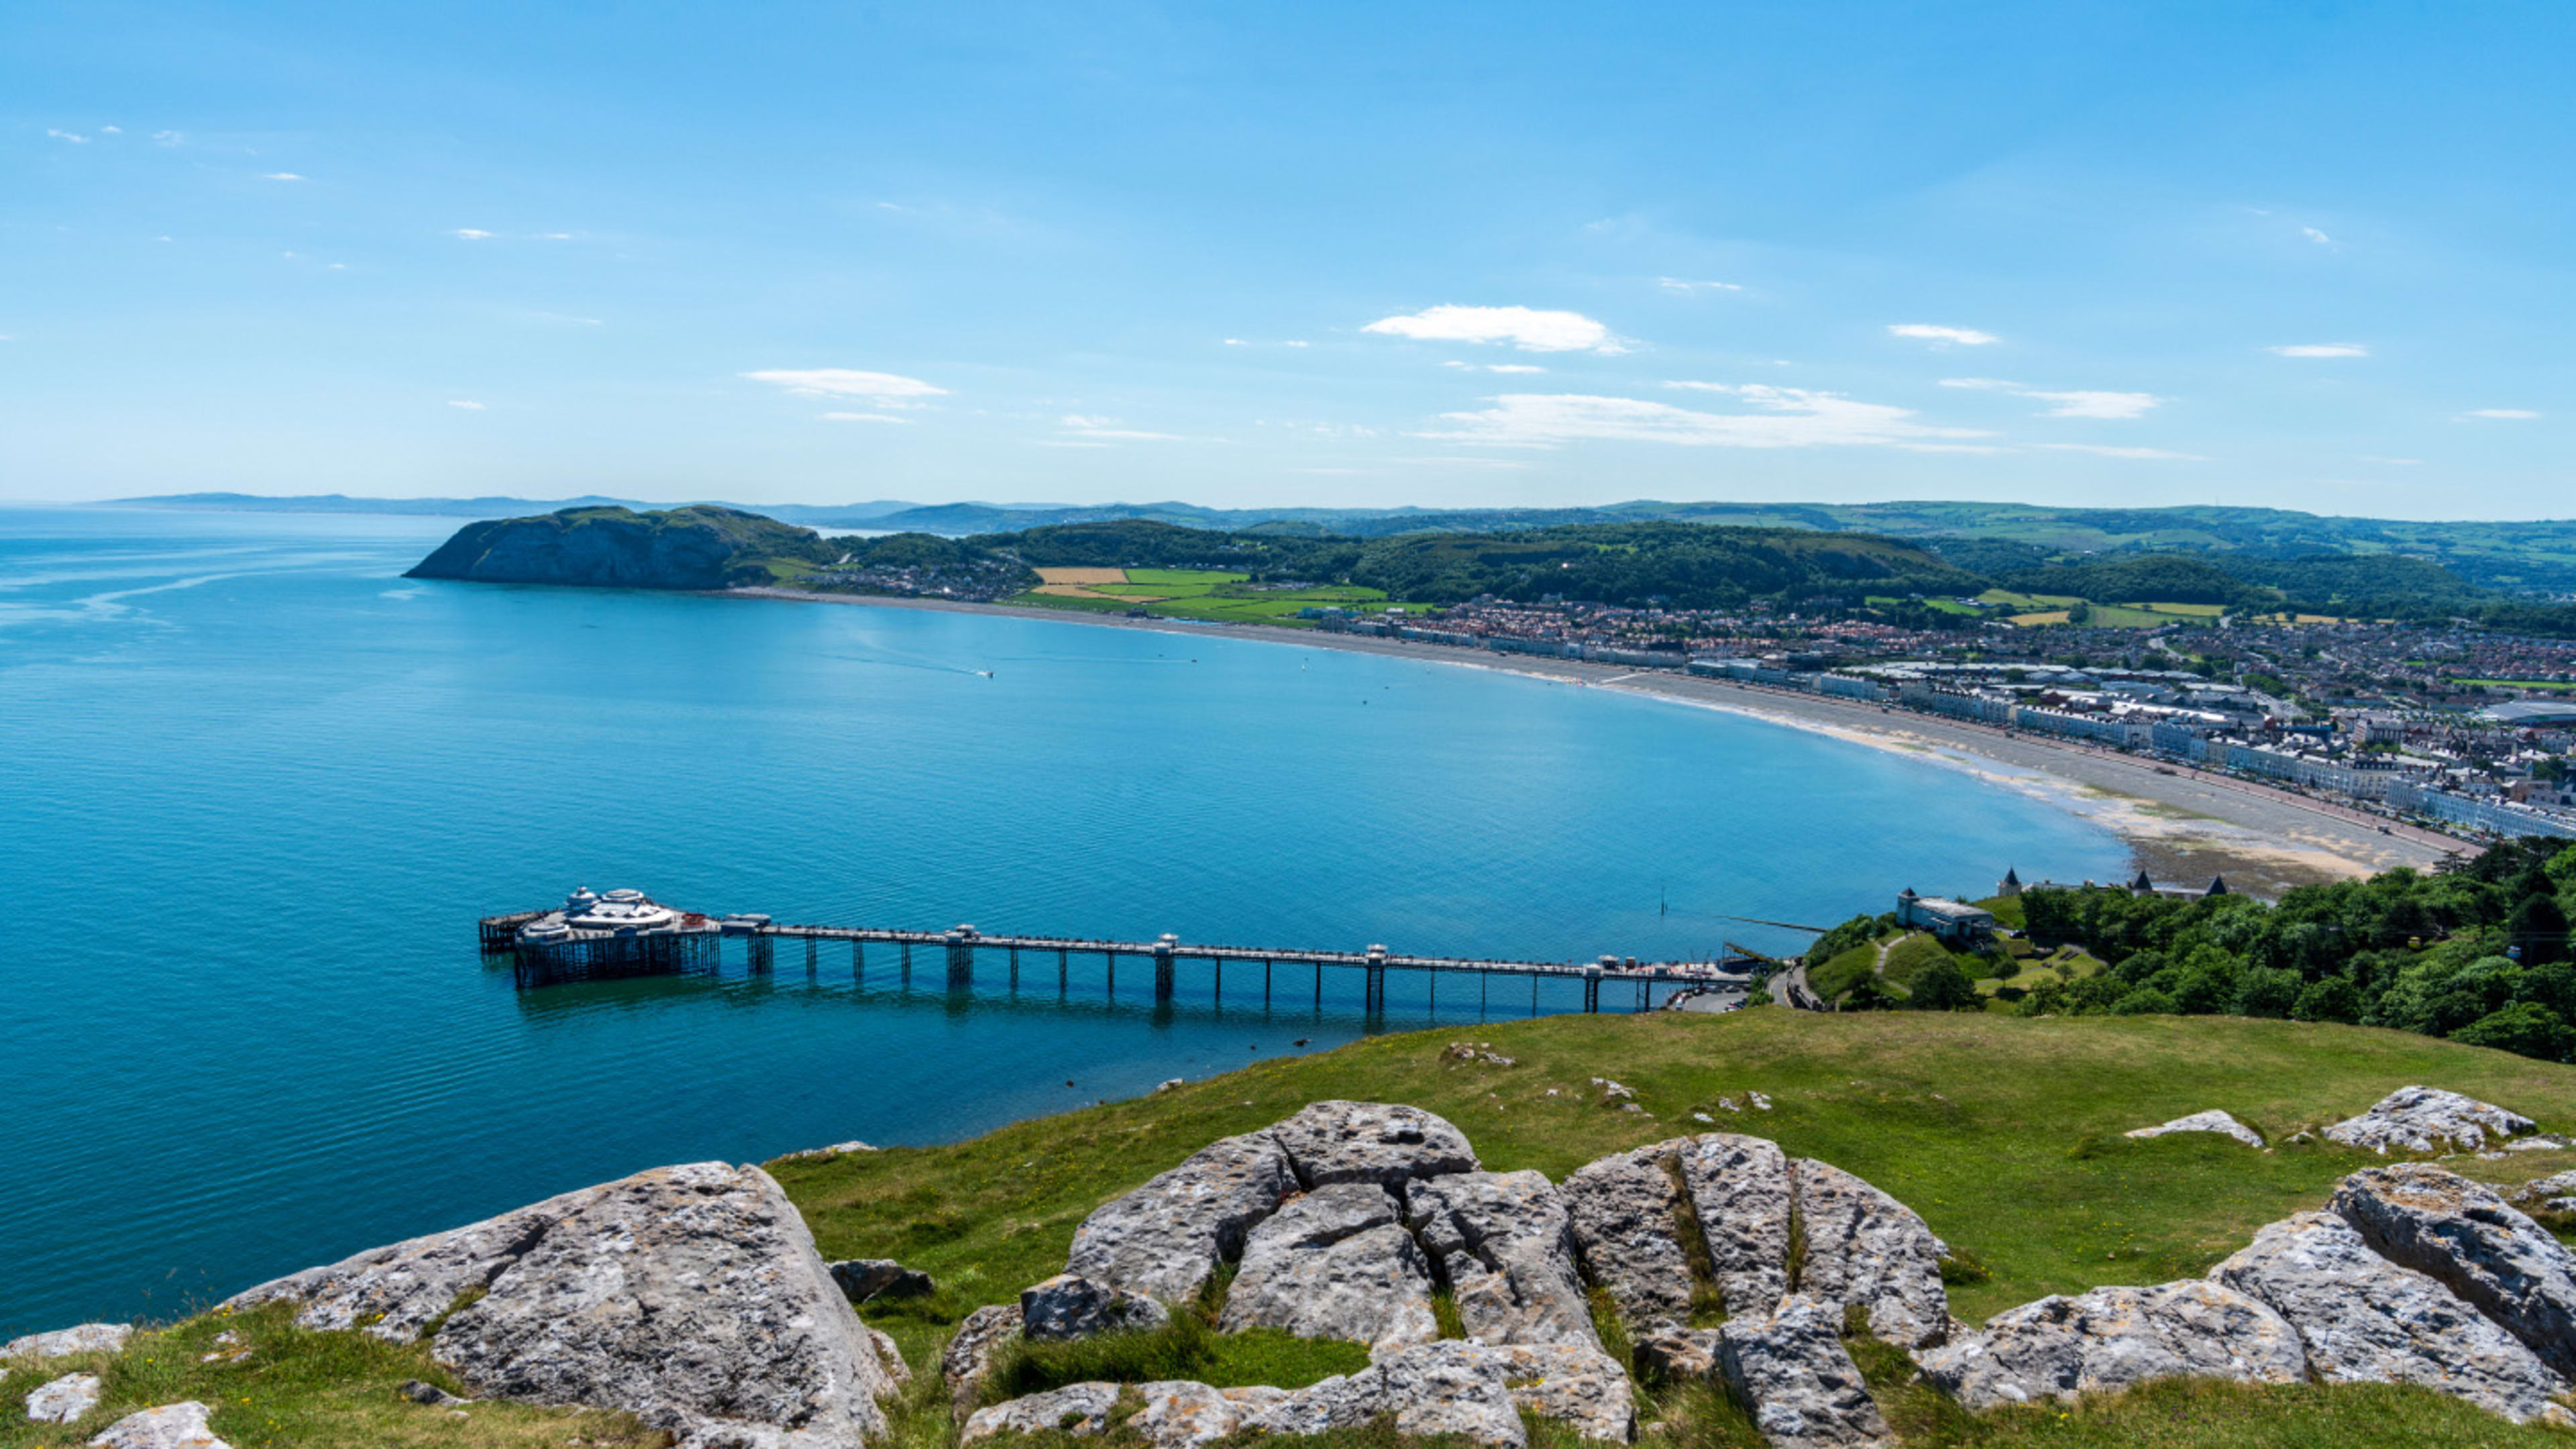 Image of Colwyn Bay in North Wales